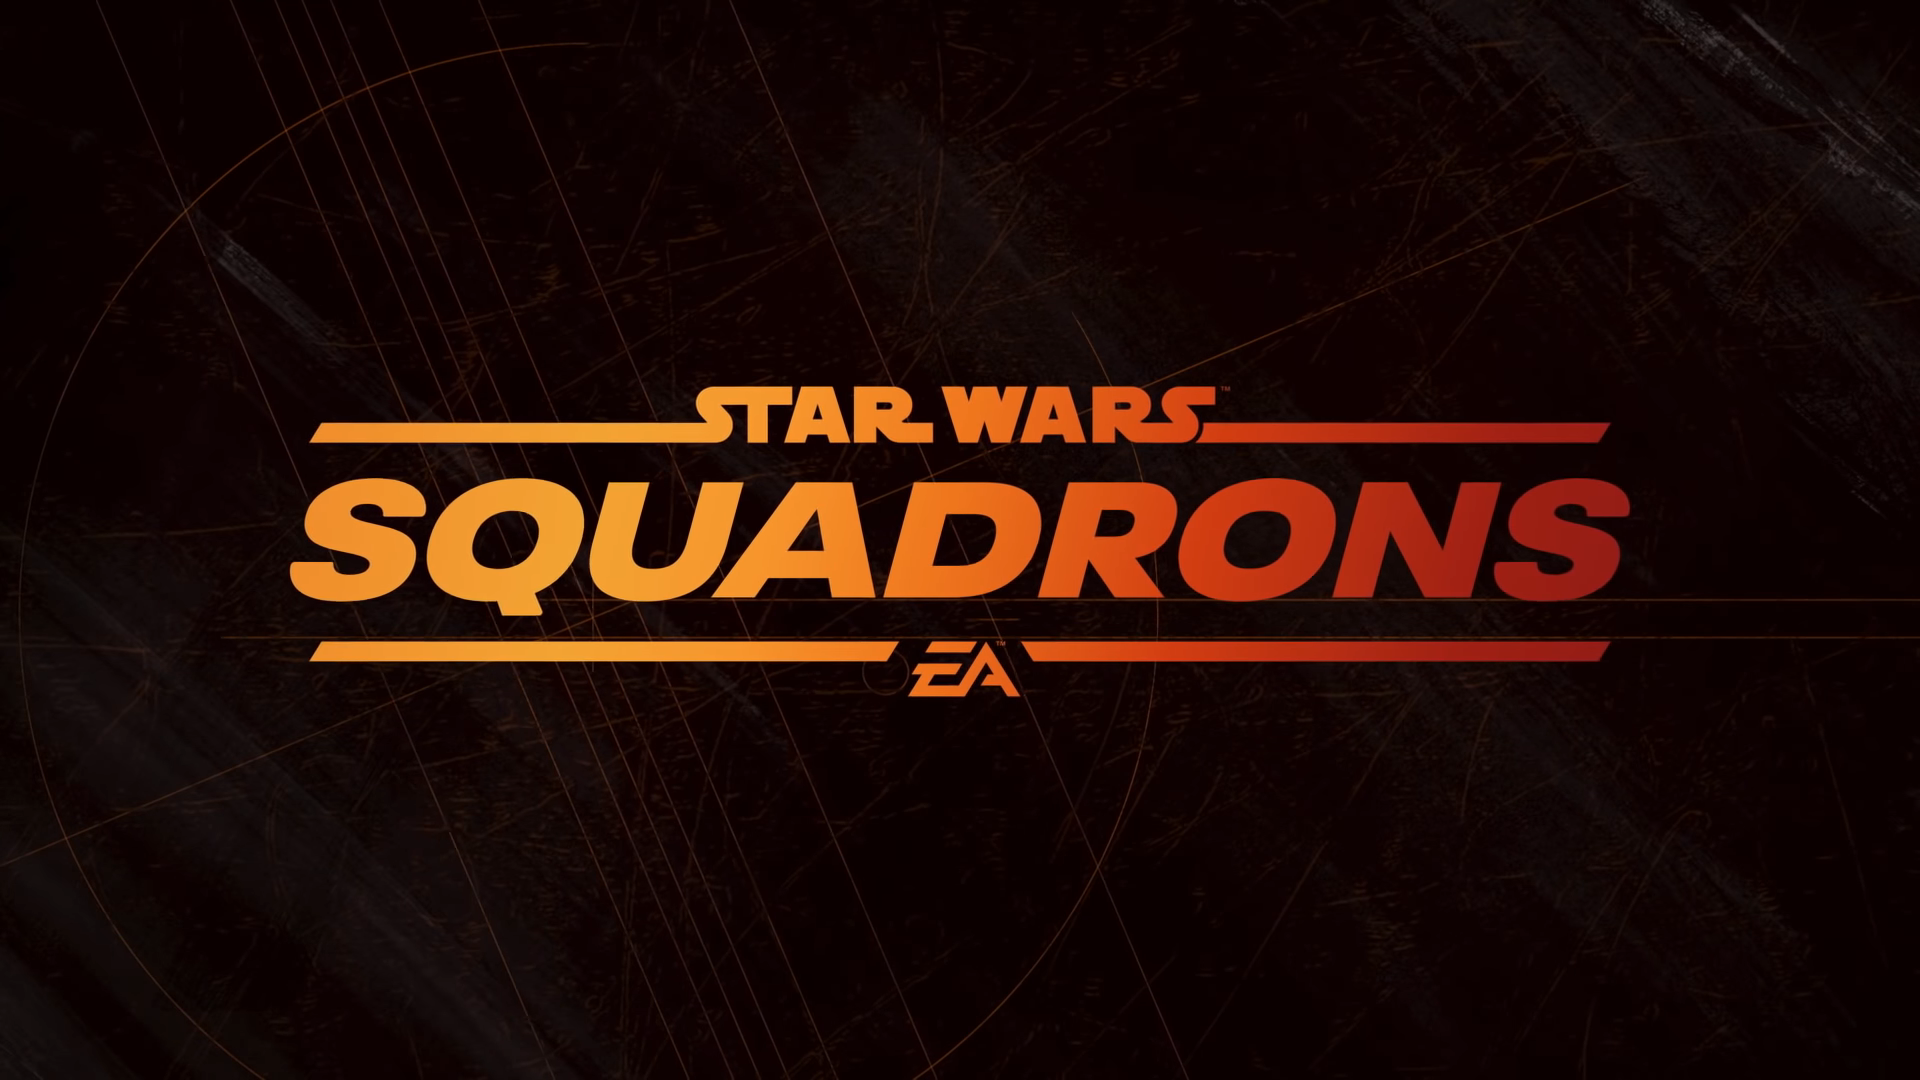 Star Wars: Squadrons | A New First Person Dogfighting Game